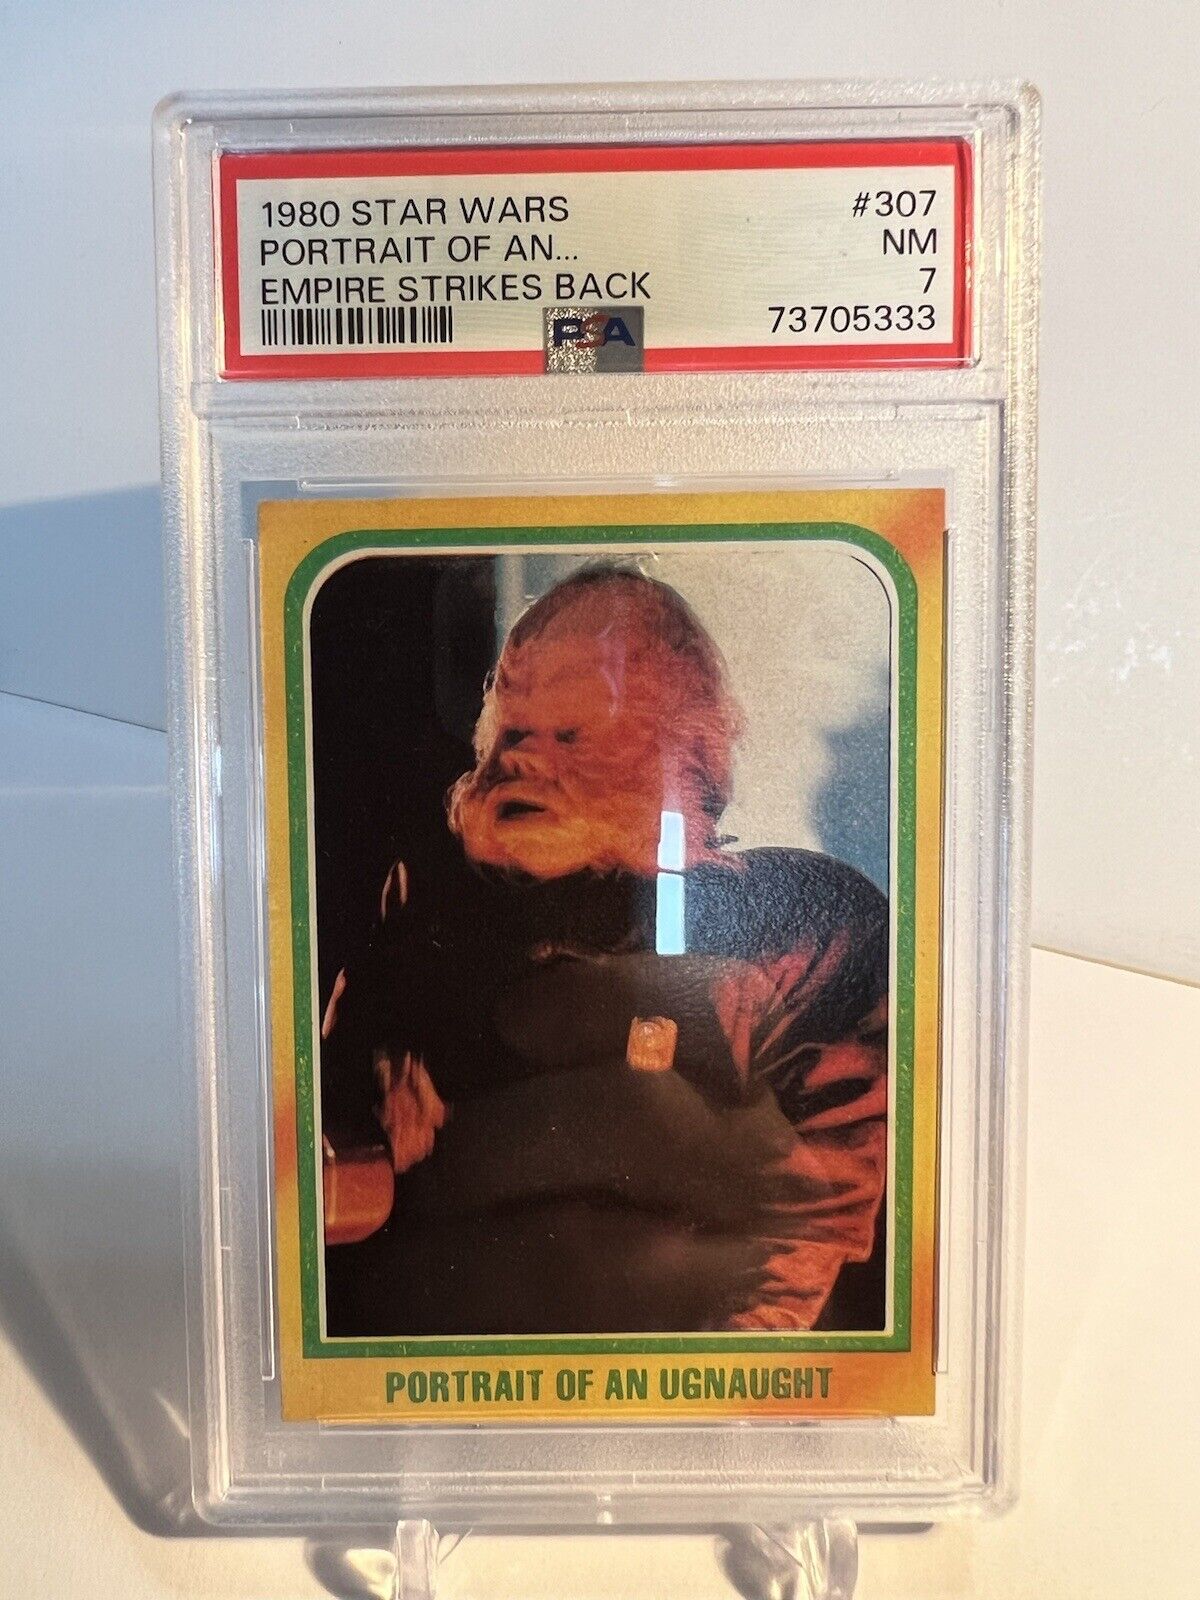 Star Wars 1980 The Empire Strikes Back #307 Portrait of an Ugnaught PSA 7 NM